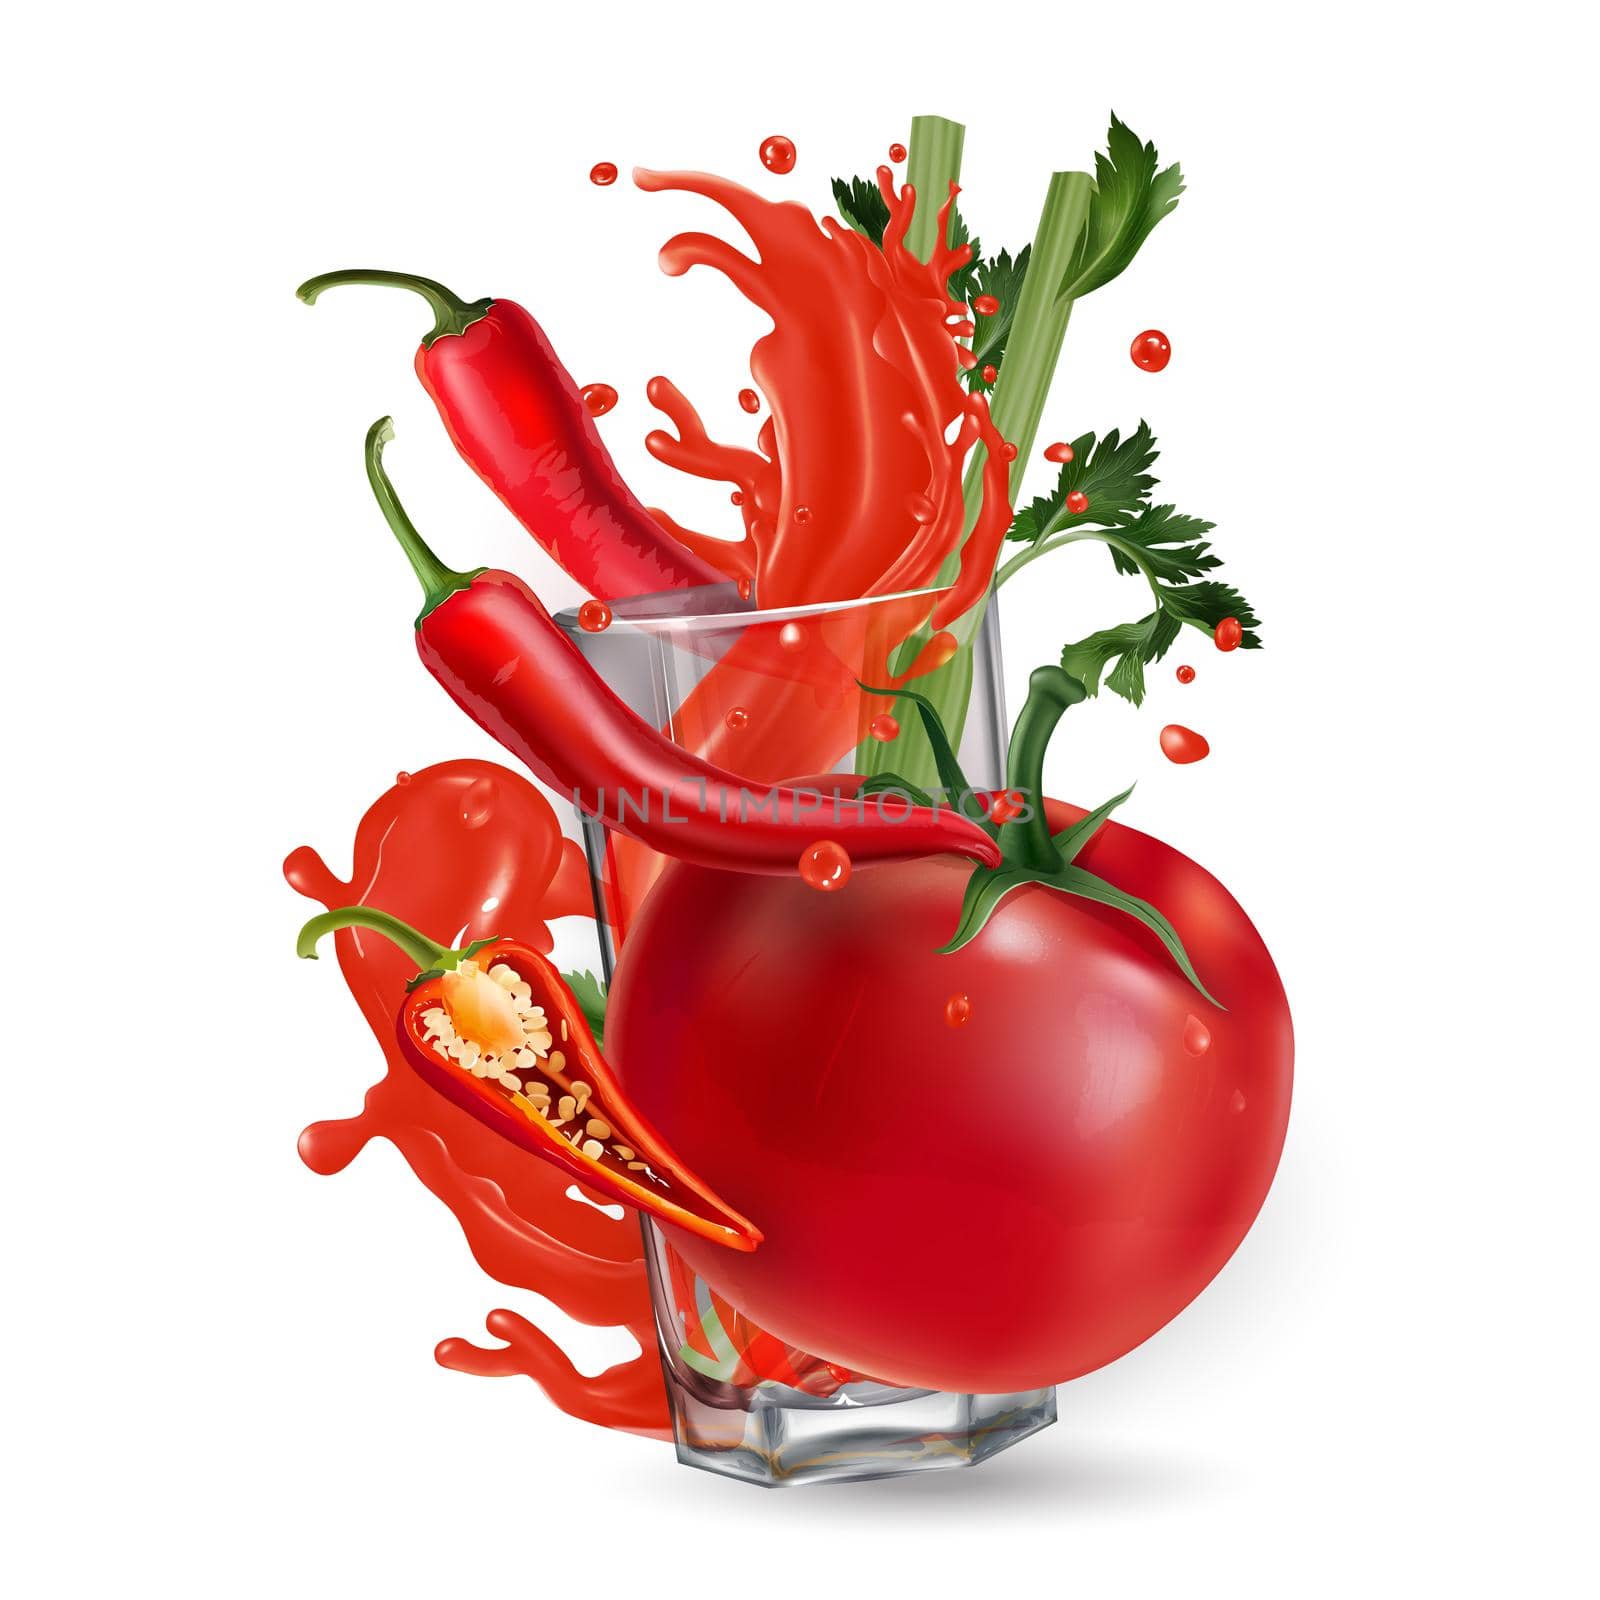 Tomato, red peppers, celery and a splash of vegetable juice in a glass on a white background. Realistic style illustration.